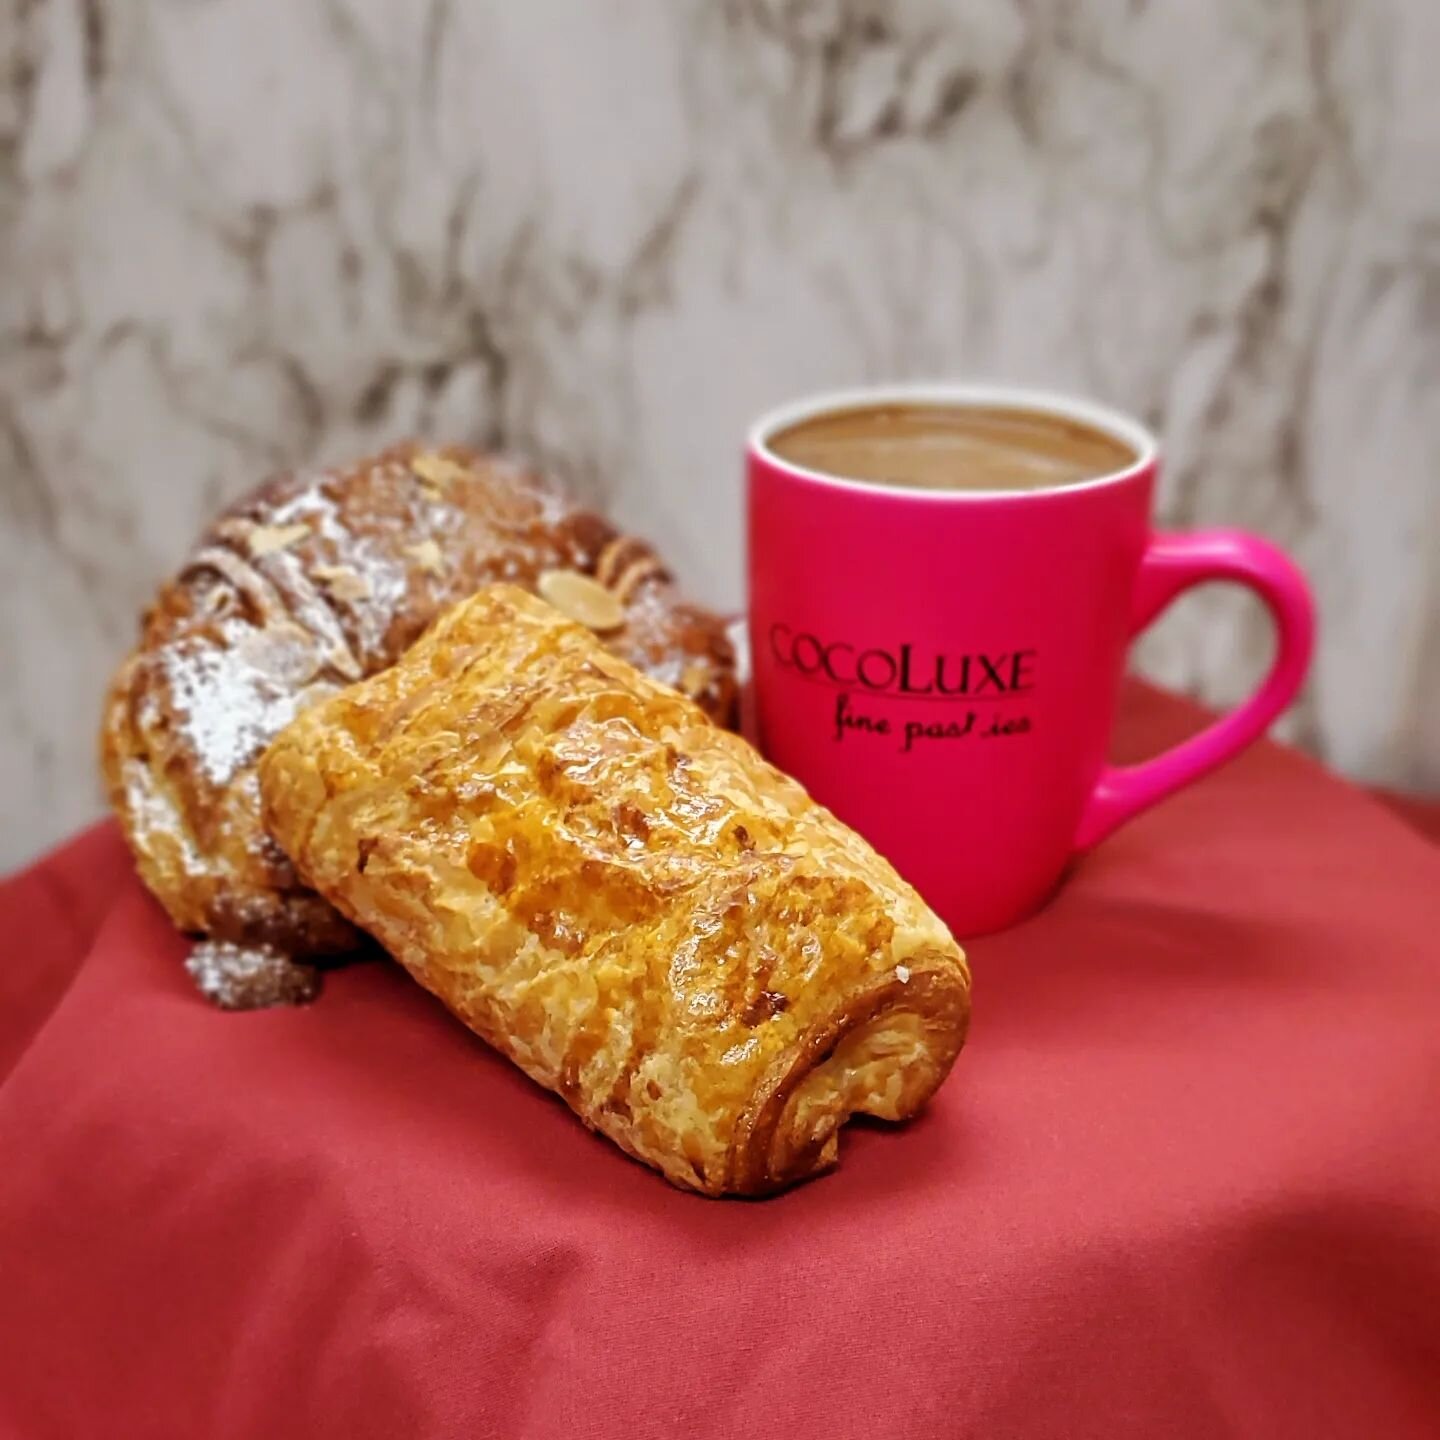 It's National Hot Chocolate Day!  Celebrate with our delicious house made hot chocolate and  flaky croissants!  Don't forget to ask about our Mexican style hot chocolate,  too!  Made with Mexican chocolate, cinnamon and spices!  #newjerseyisntboring 